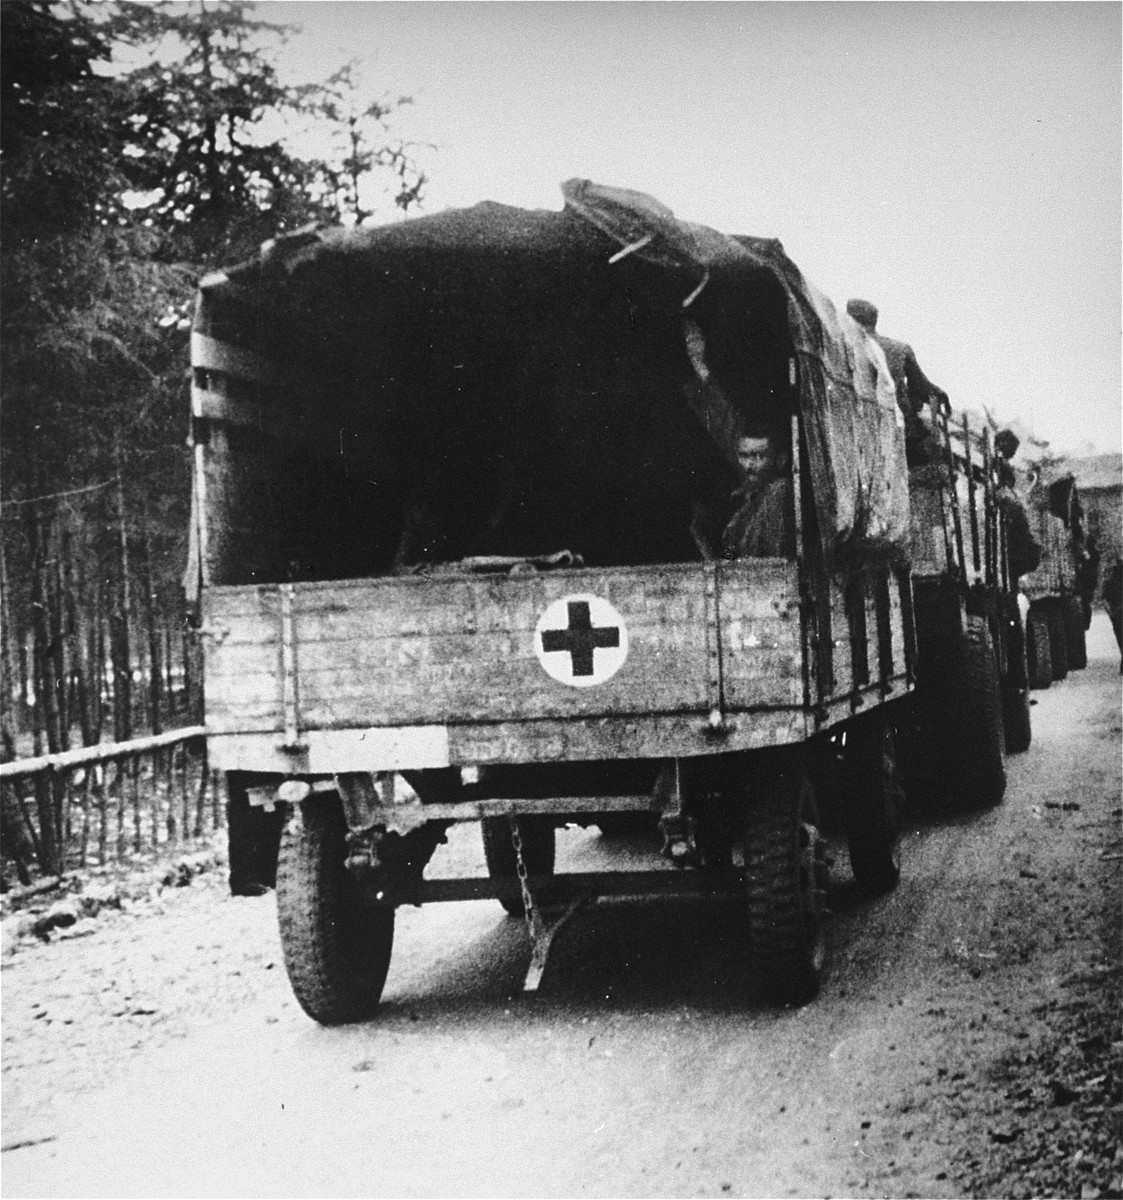 Survivors from Ebensee are evacuated to the 139th Evacuation Hospital for medical treatment.